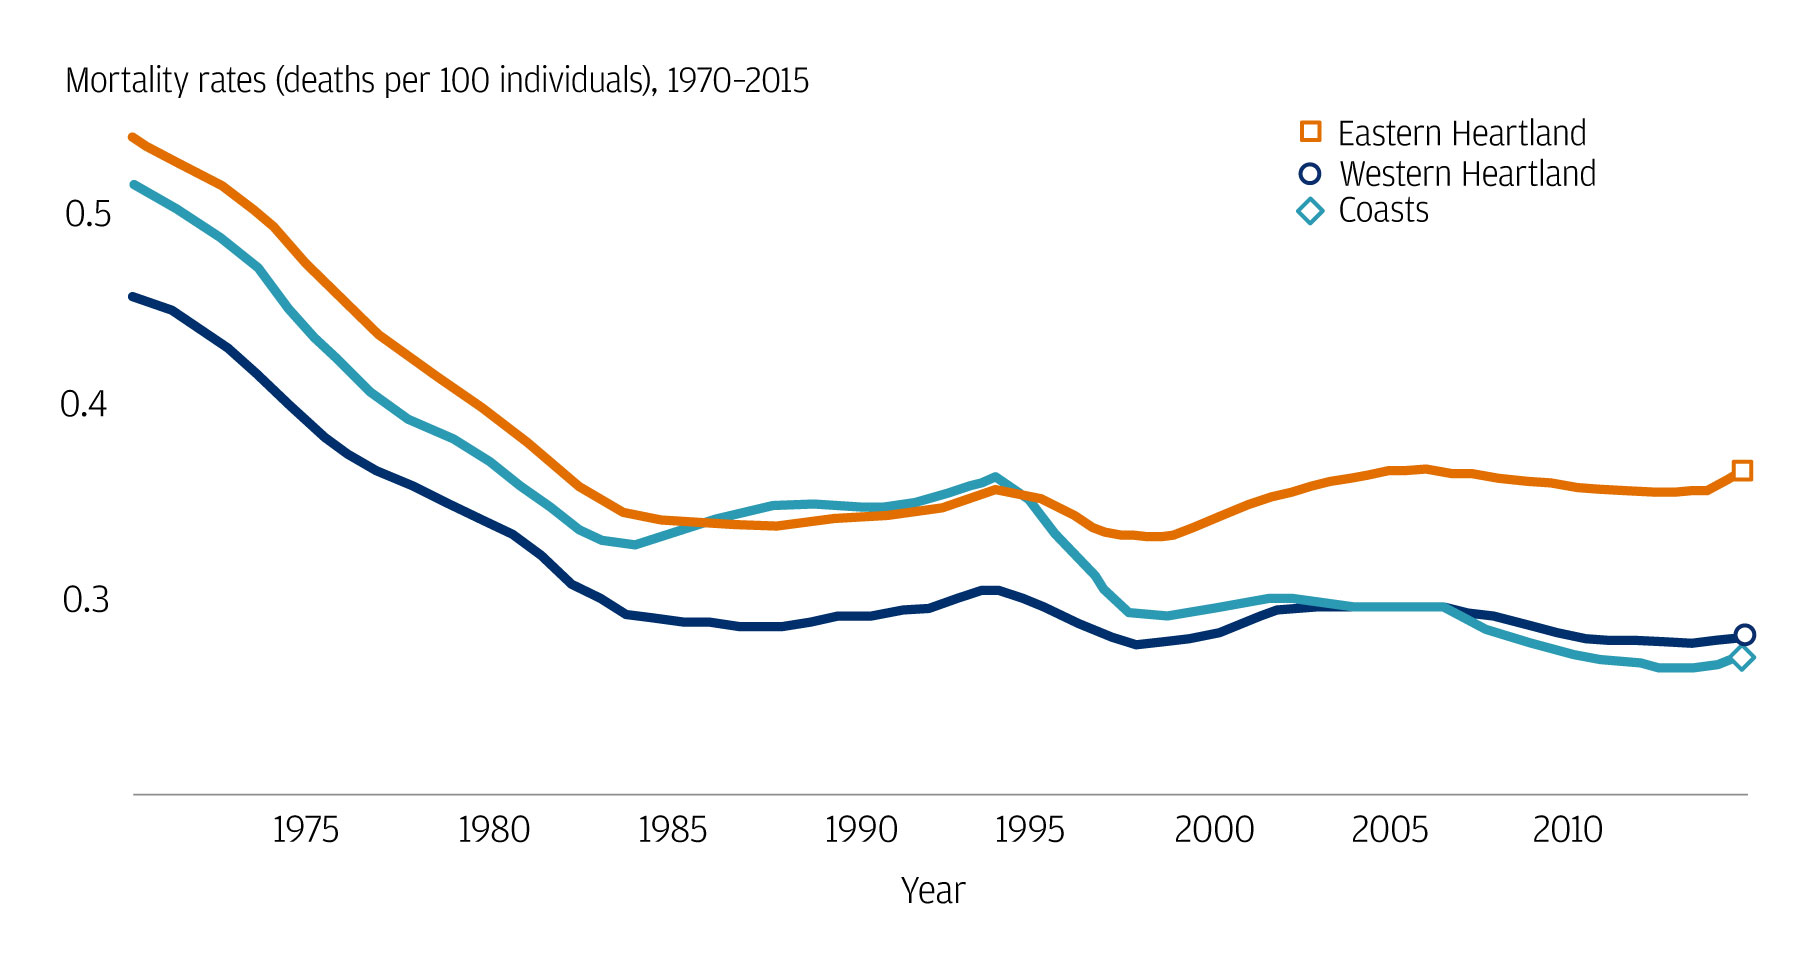 Mortality rates diverged geographically